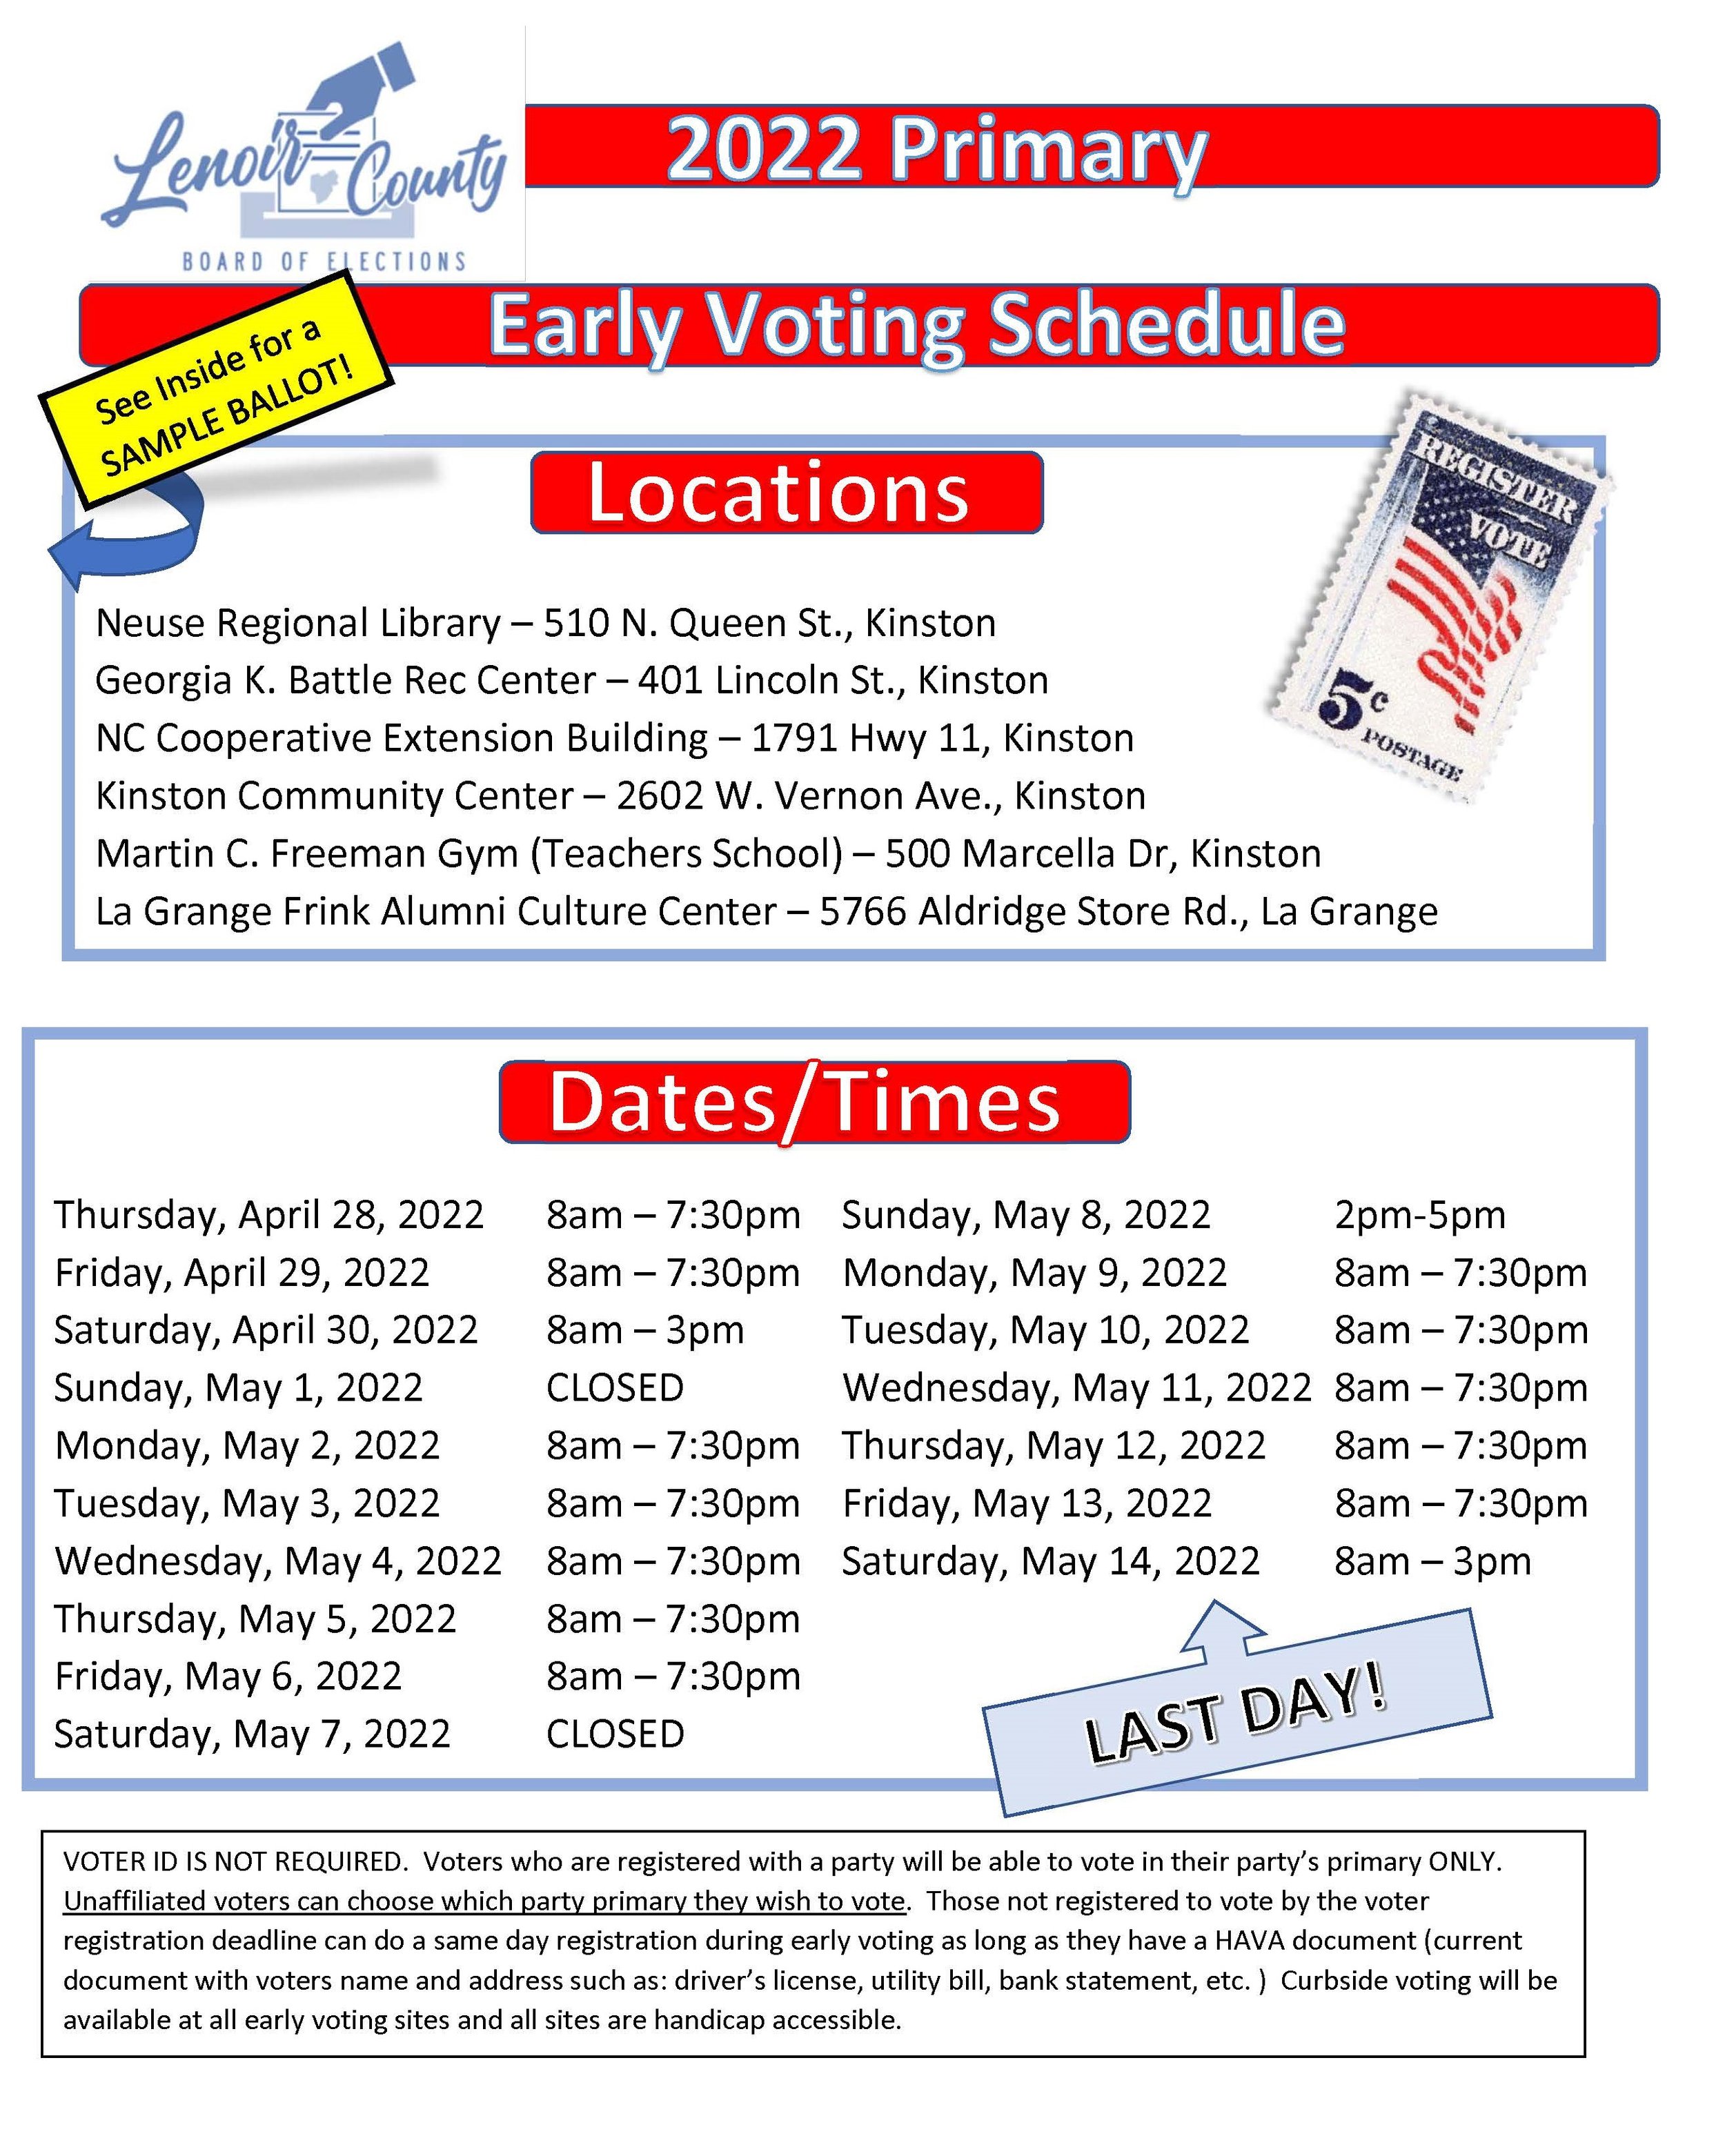 2022 Primary Early Voting Schedule.jpg